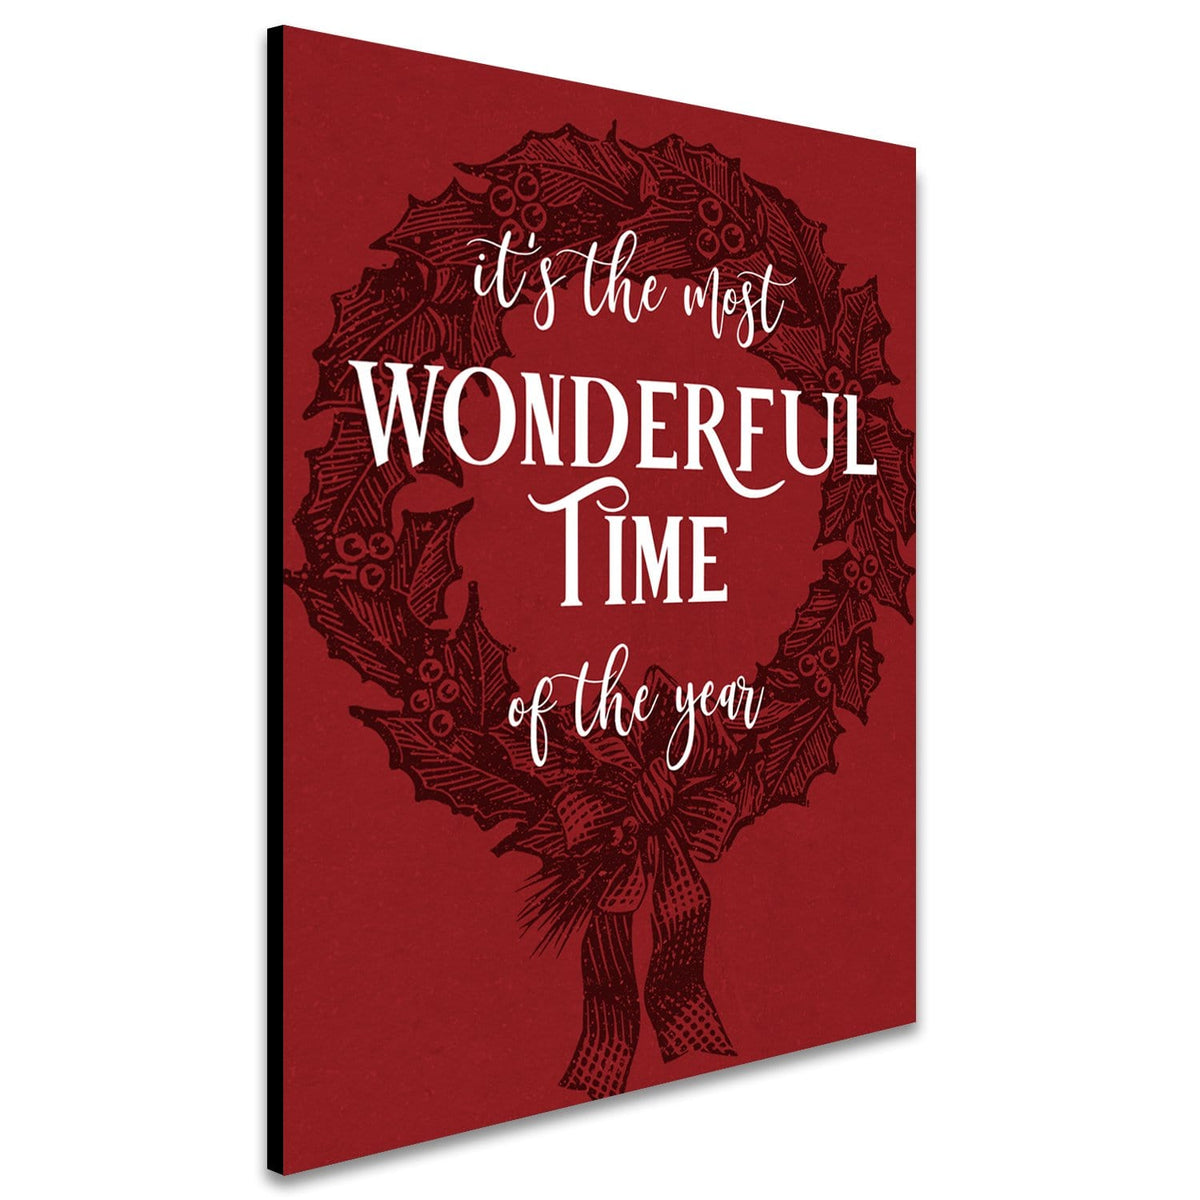 Its the most wonderful time of the year sign from Personal Prints